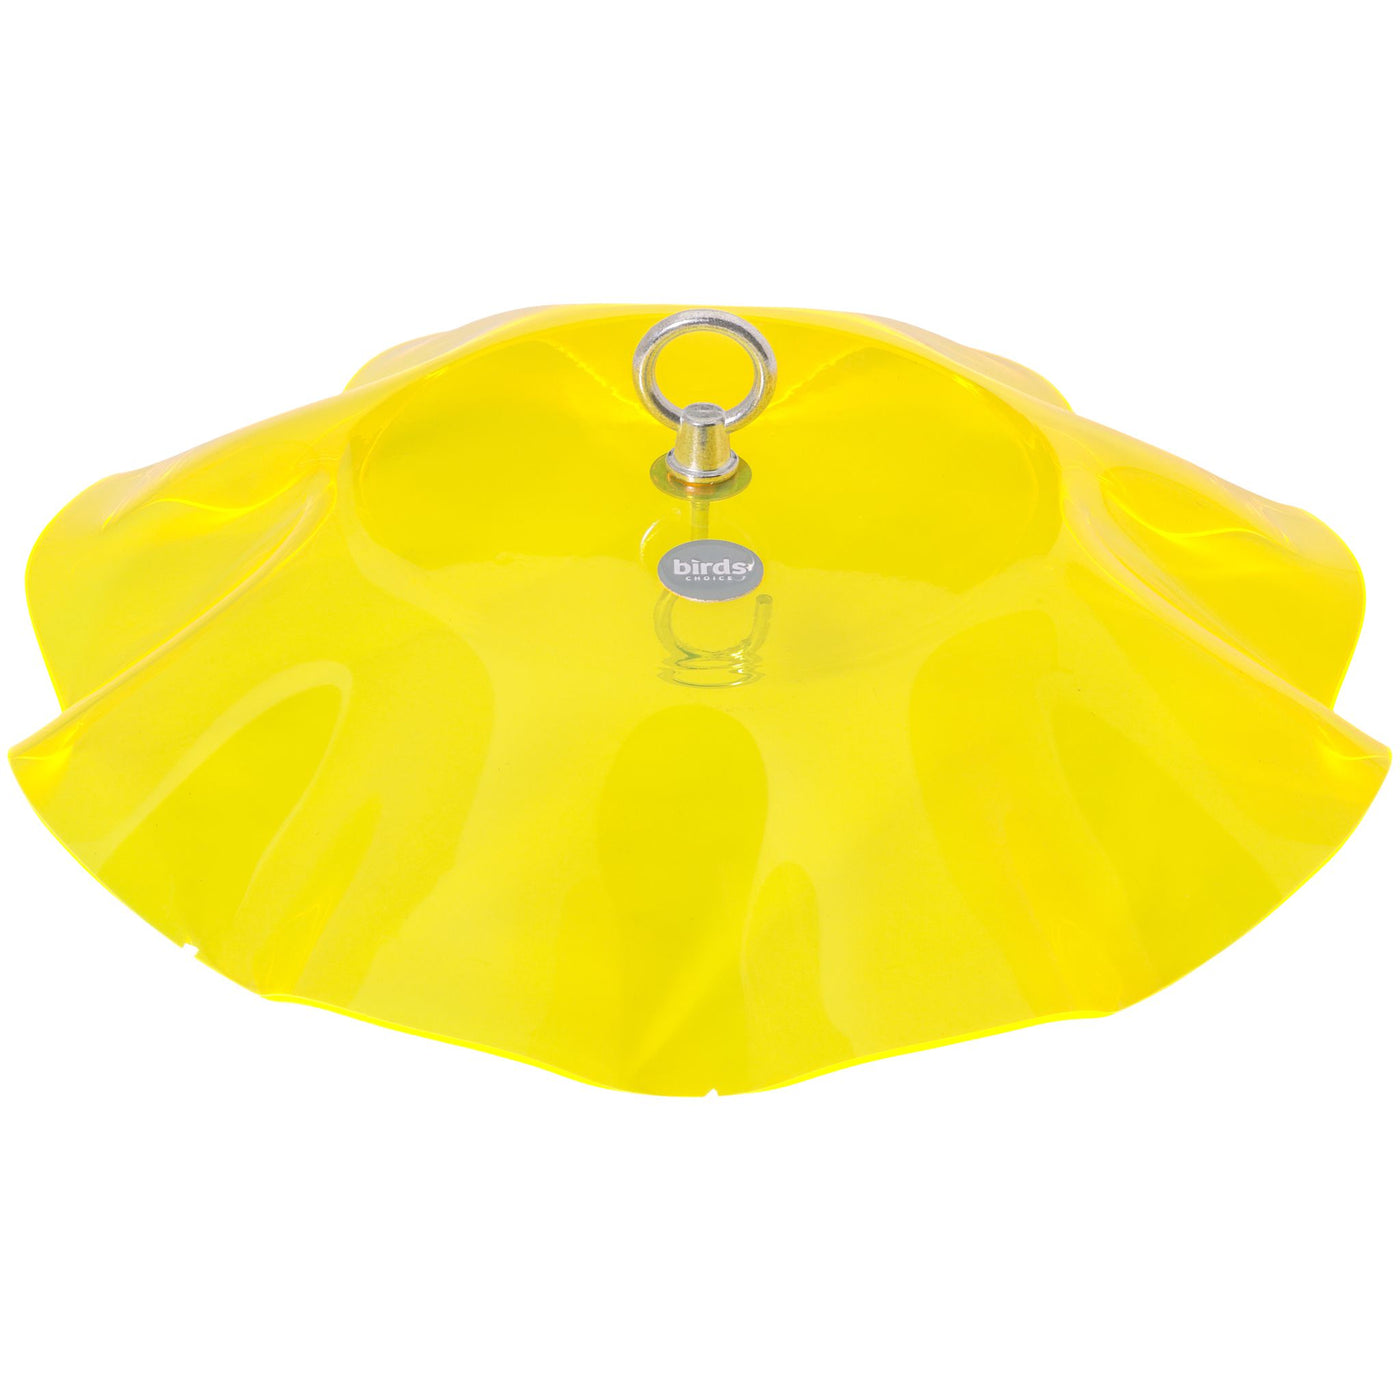 Fluorescent Yellow  Protective Cover for Hanging Bird Feeder with Scalloped Edges - Birds Choice